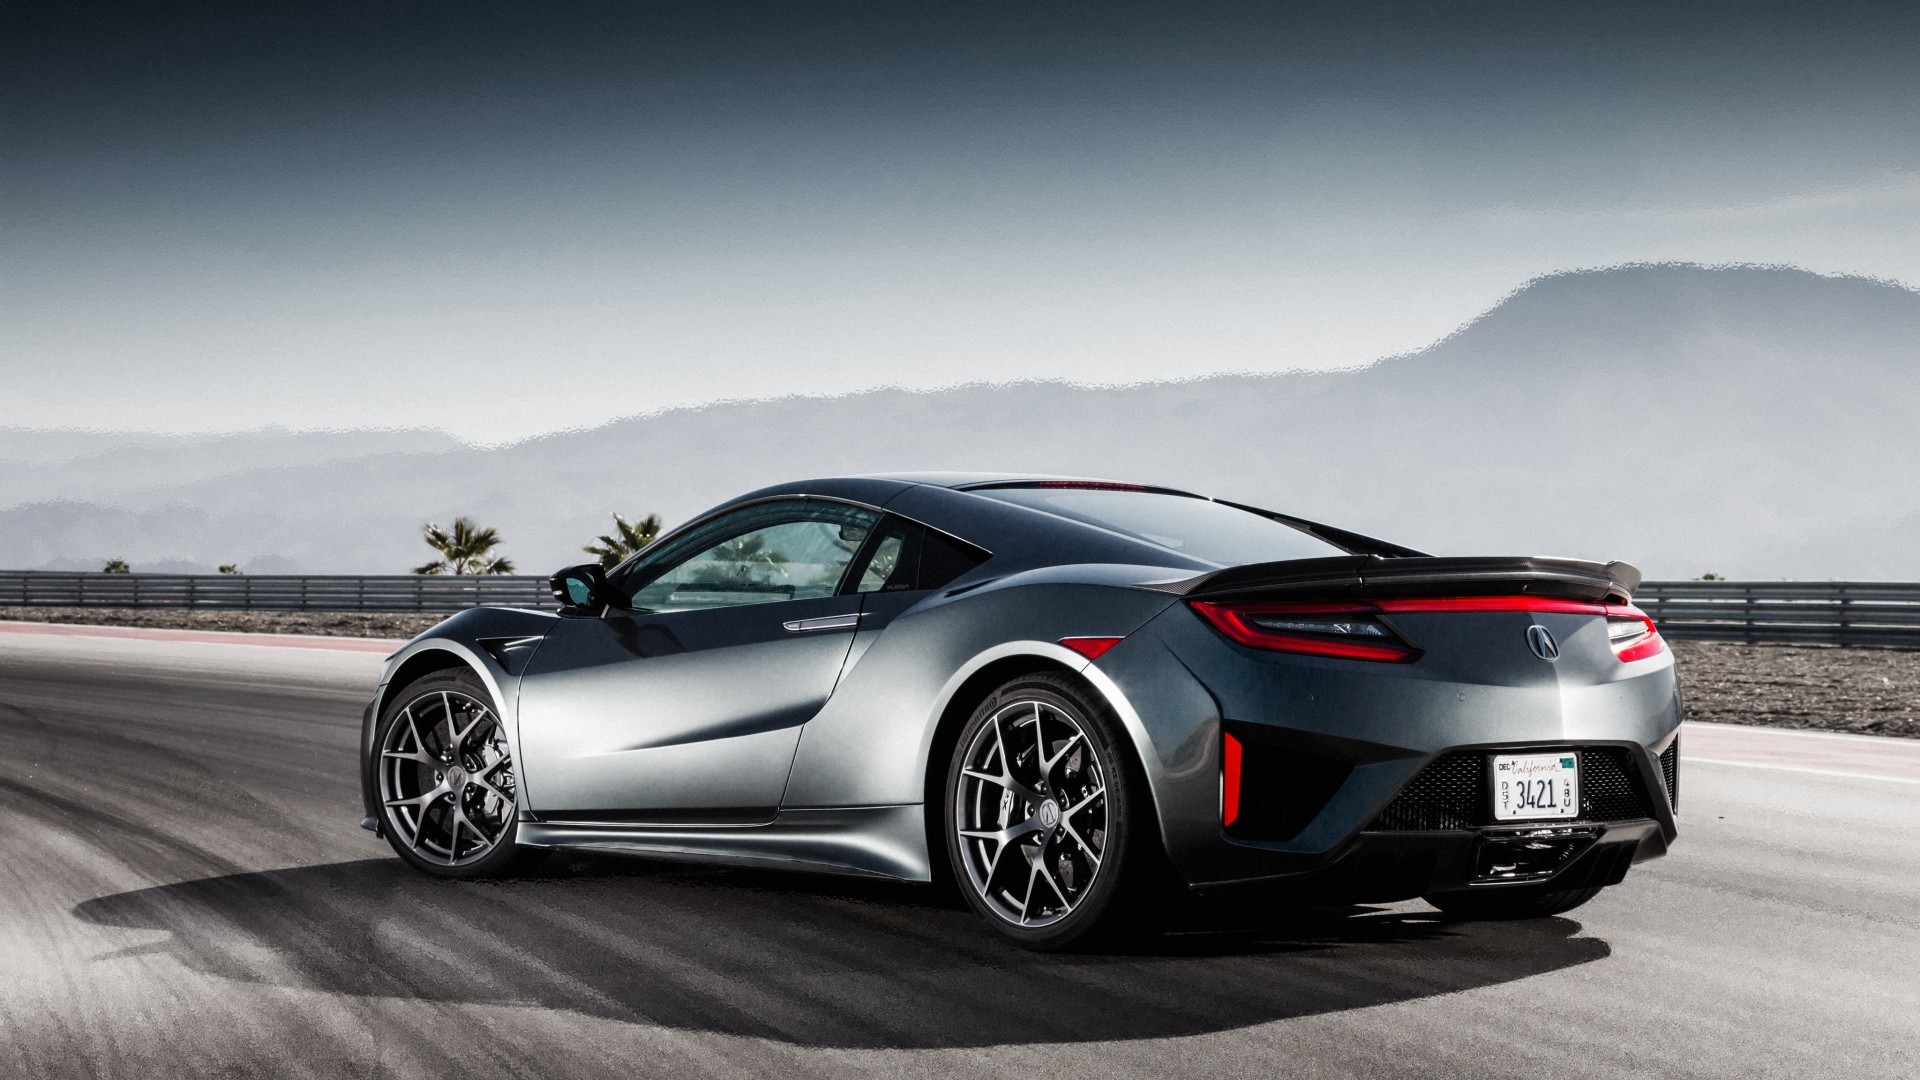 Acura Nsx - Acura Nsx Back View , HD Wallpaper & Backgrounds